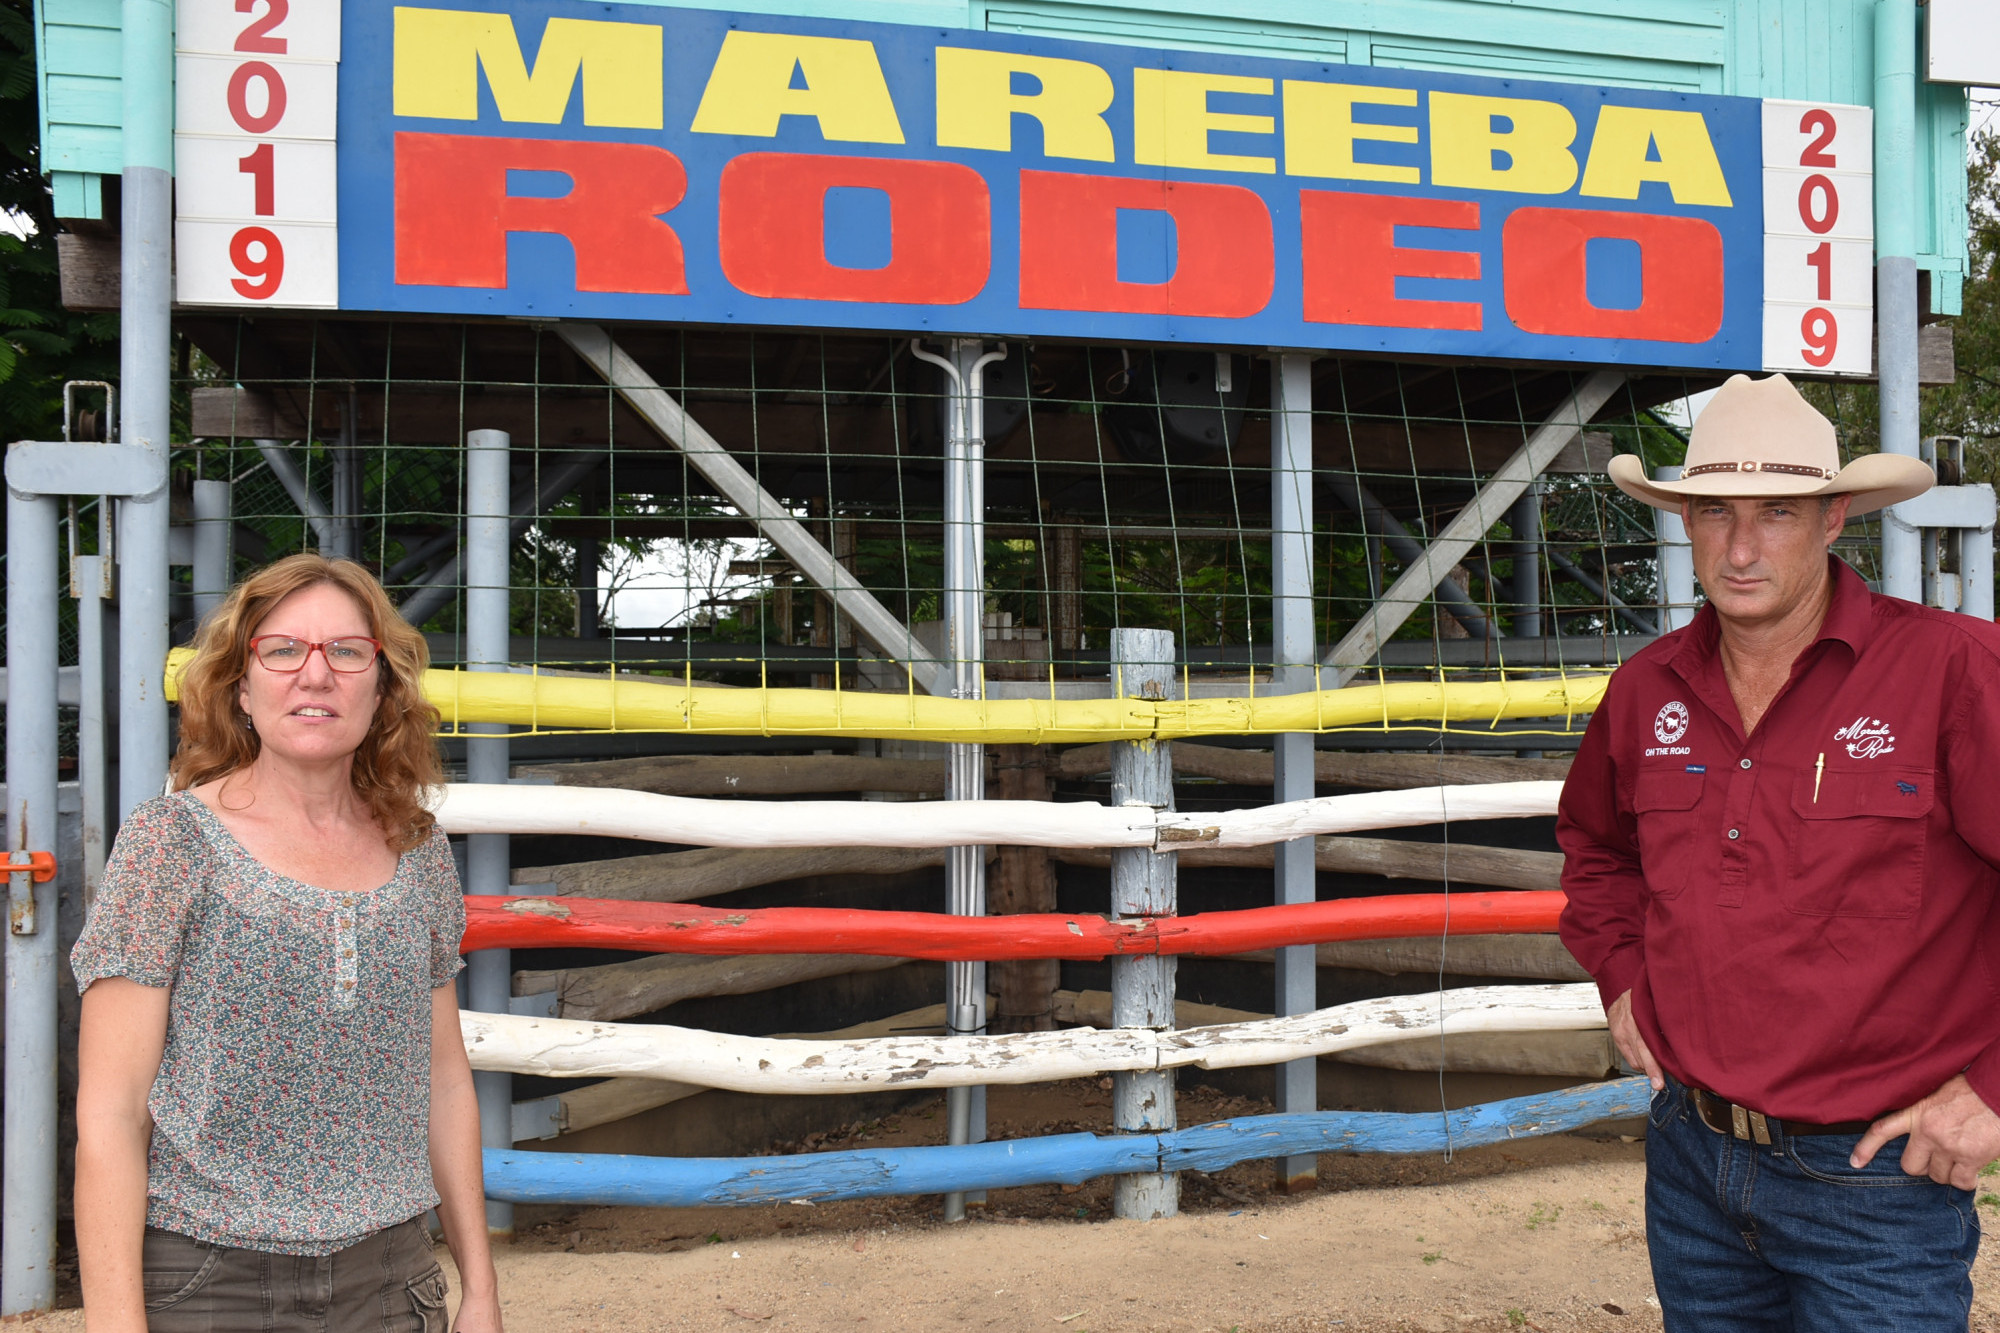 Mareeba Rodeo Association Secretary Cecilia Clark and President Peter Brown out front of the 2019 sign which was last the last time the Mareeba Rodeo took place